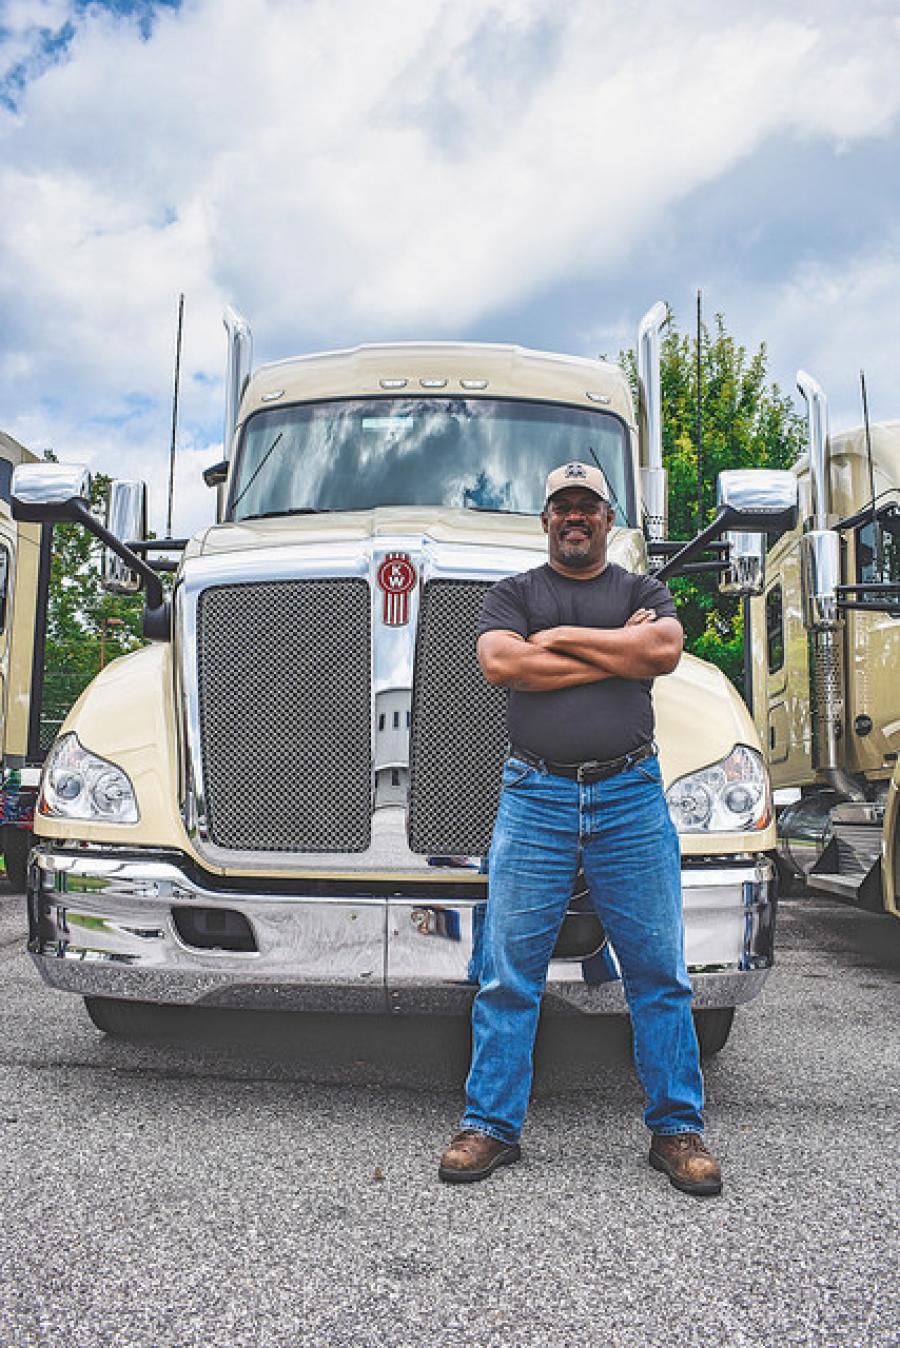 Along with other Hornady Transportation drivers, John Bridgwaters, hired in September of 2017, is receiving a pay raise. Hornady announced in November an increase in per-mile pay along with incentive enhancements for both current and new-hire drivers. The raise comes on the heels of the company's recent announcement of a minimum weekly pay for drivers of $1,000.